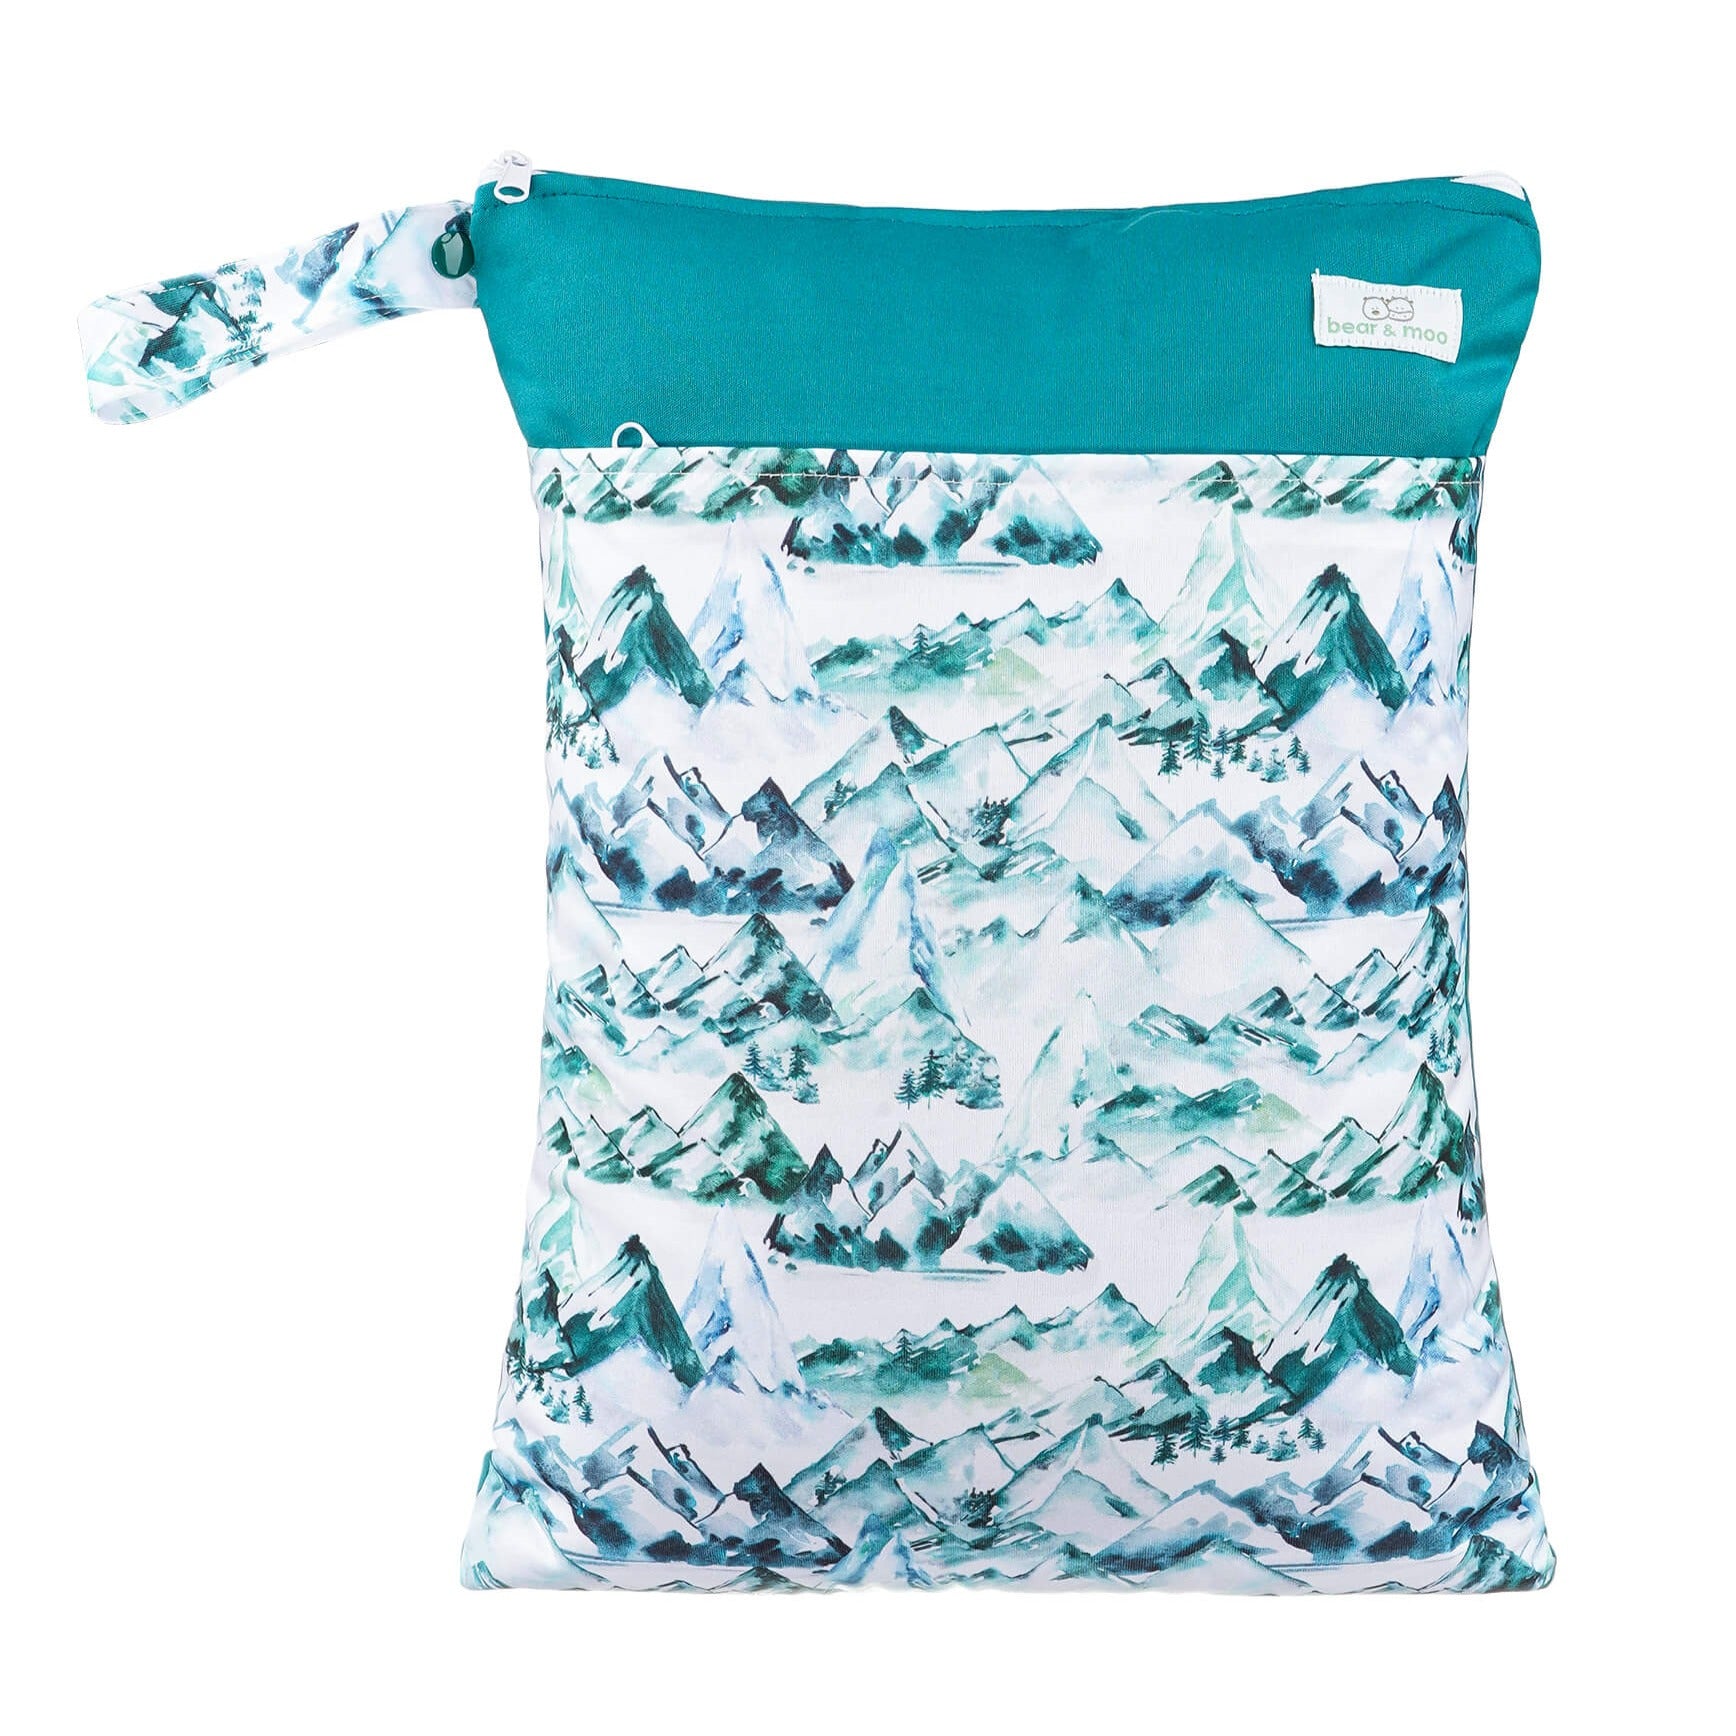 Bear & Moo Reusable Large Wet Bag in Moody Mountains